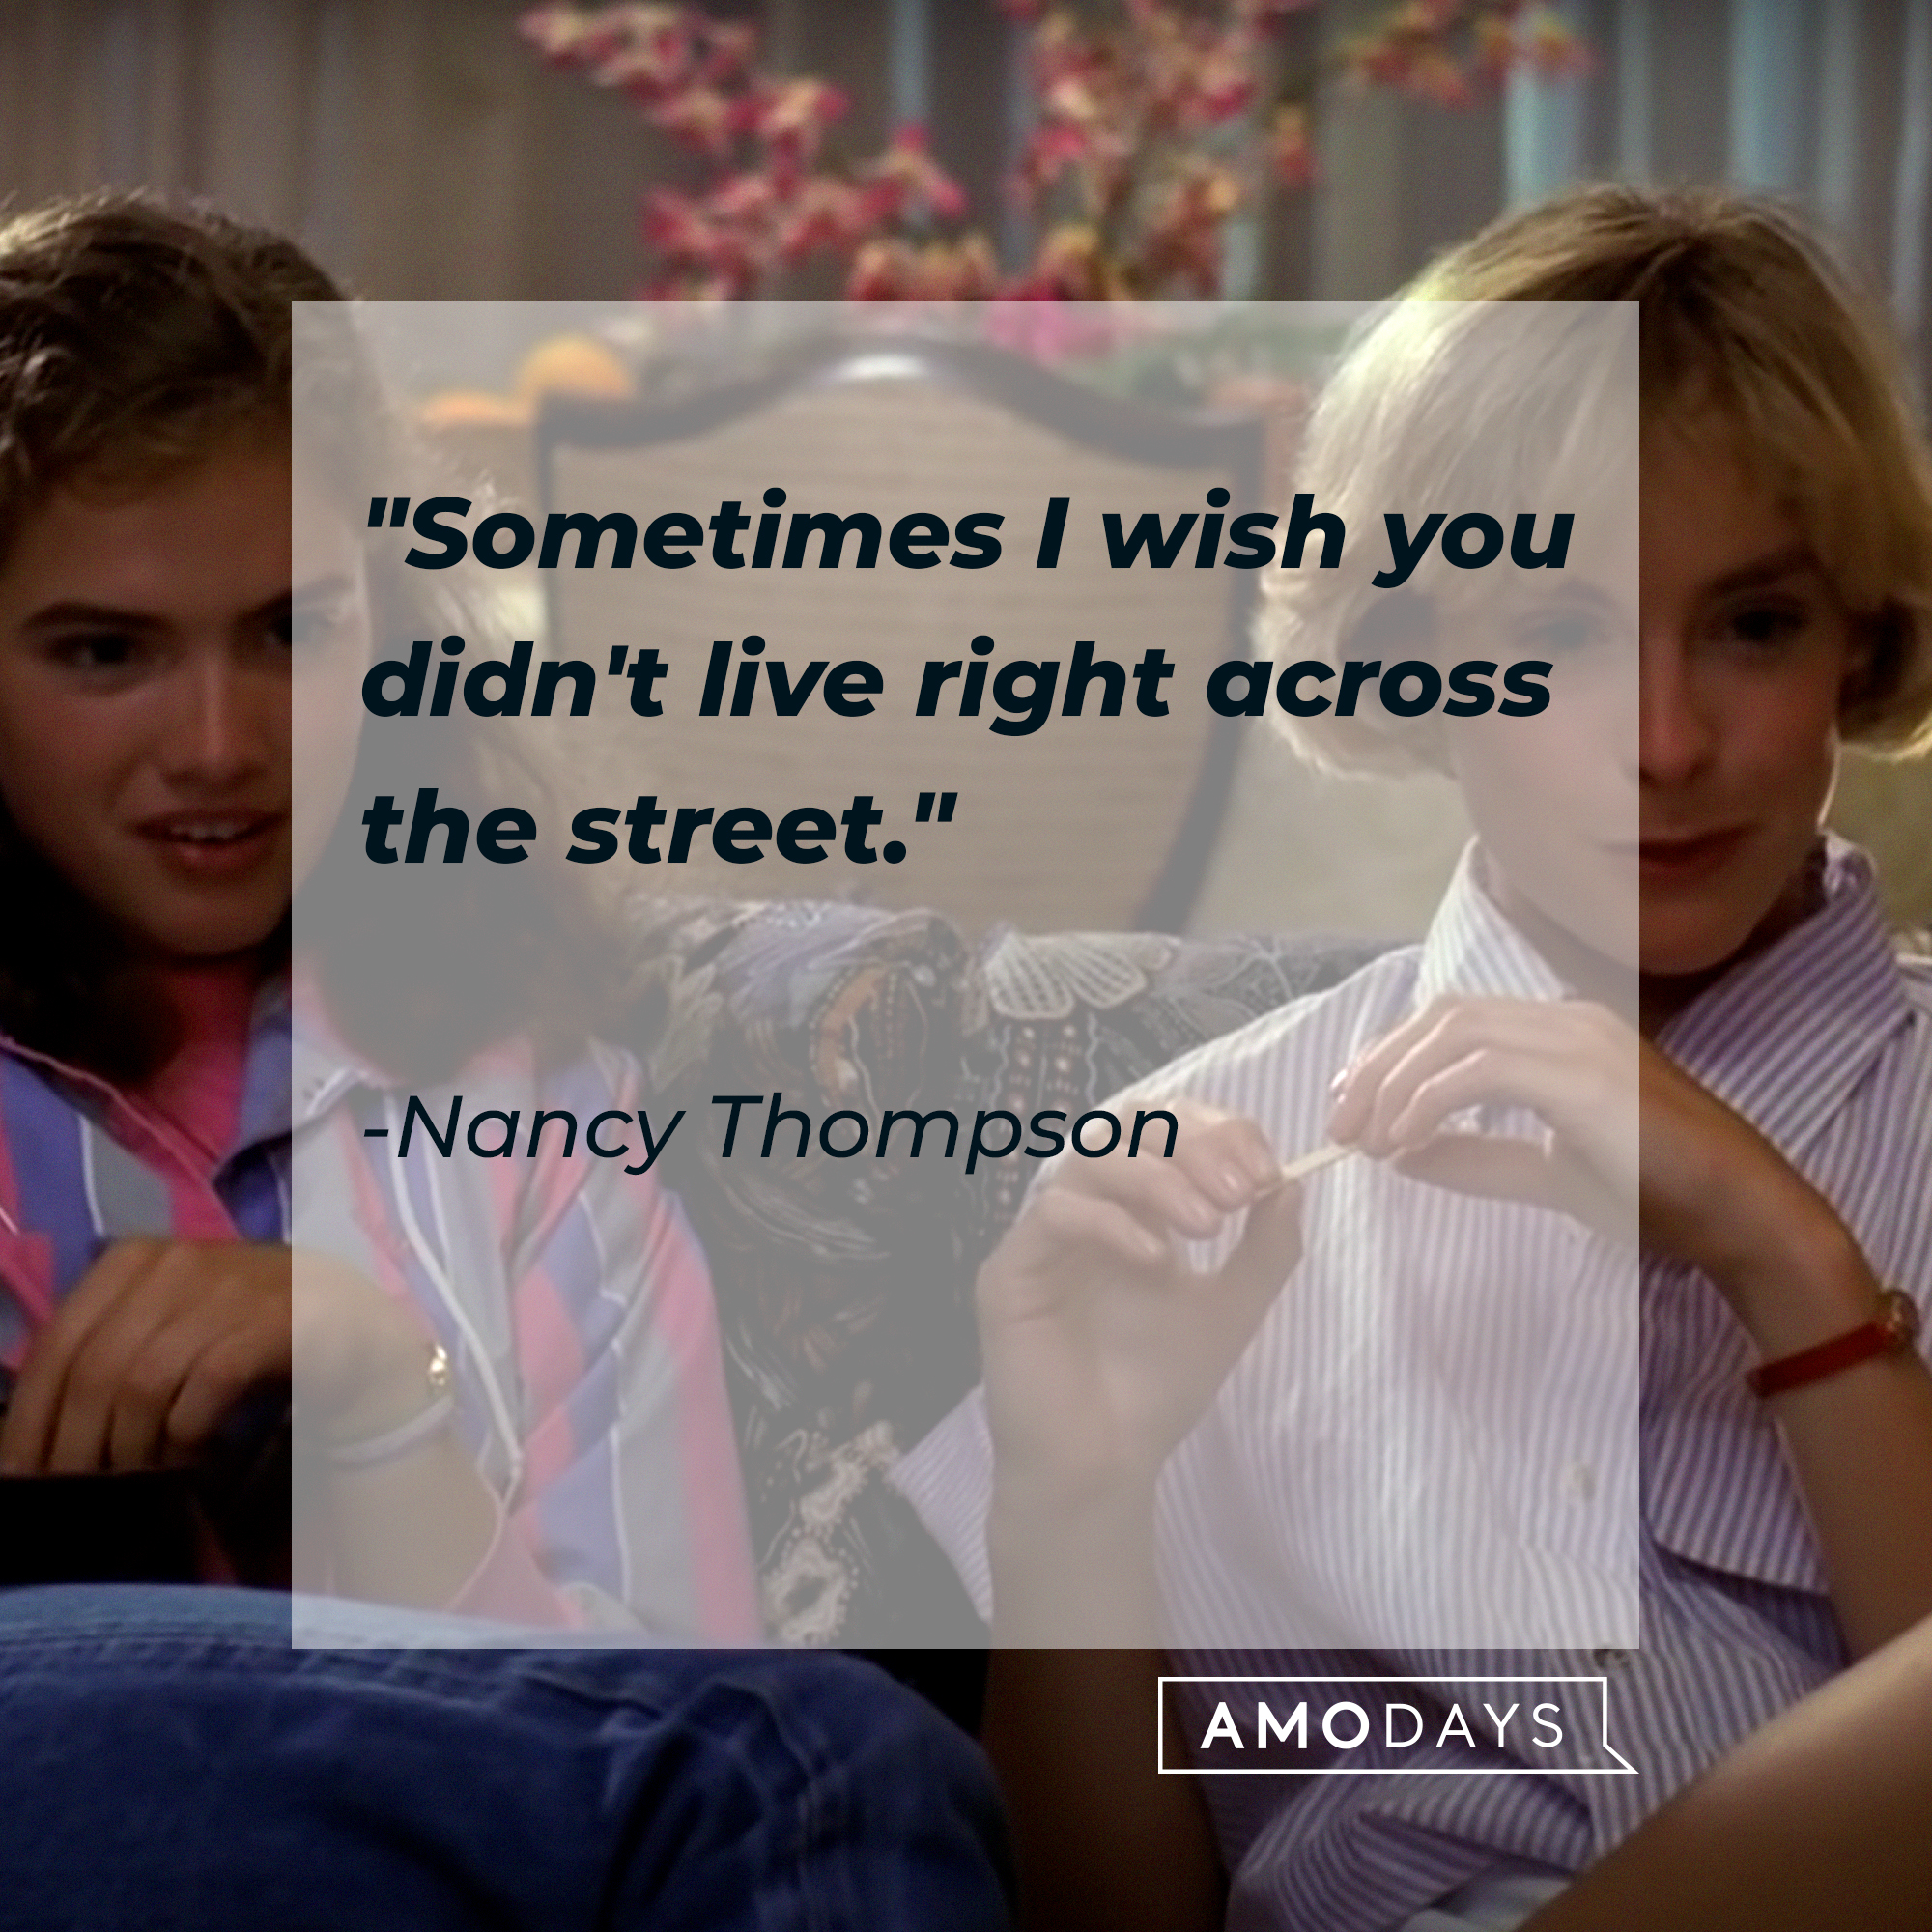 Nancy Thompson's quote: "Sometimes I wish you didn't live right across the street." | Source: Facebook/ANightmareonElmStreet